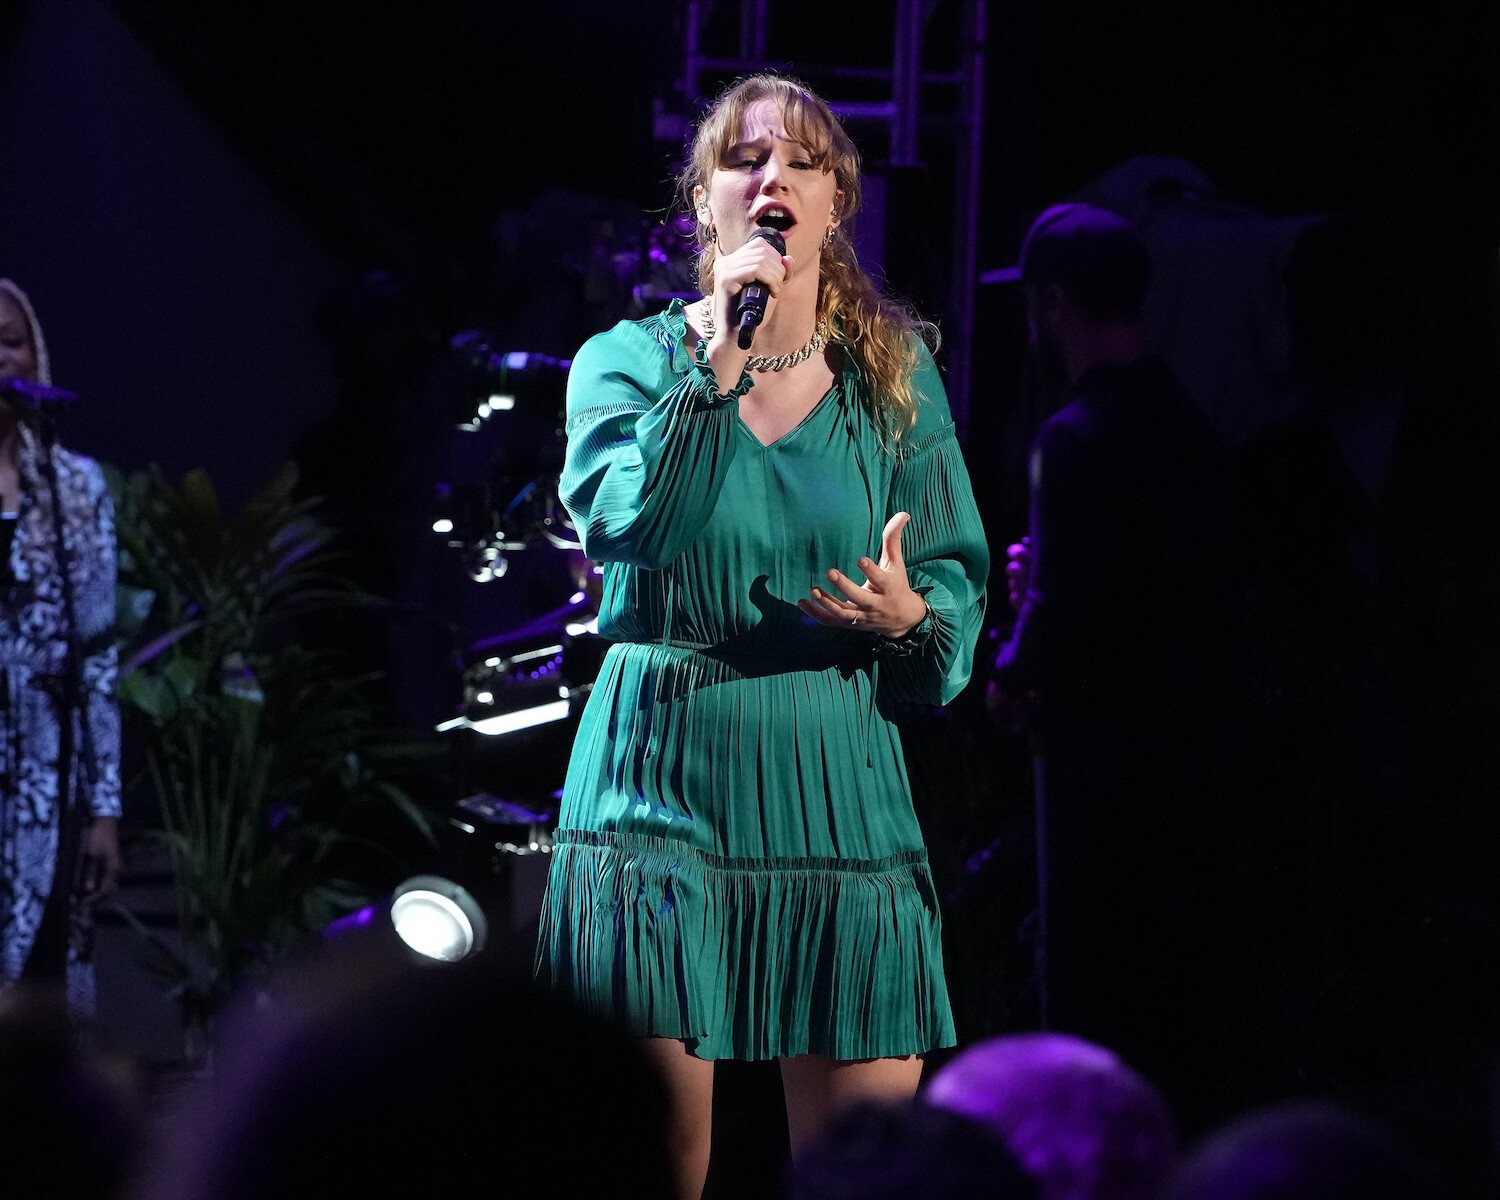 Hannah Nicolaisen in the 'American Idol' 2023 top 26 singing on stage while wearing a green dress